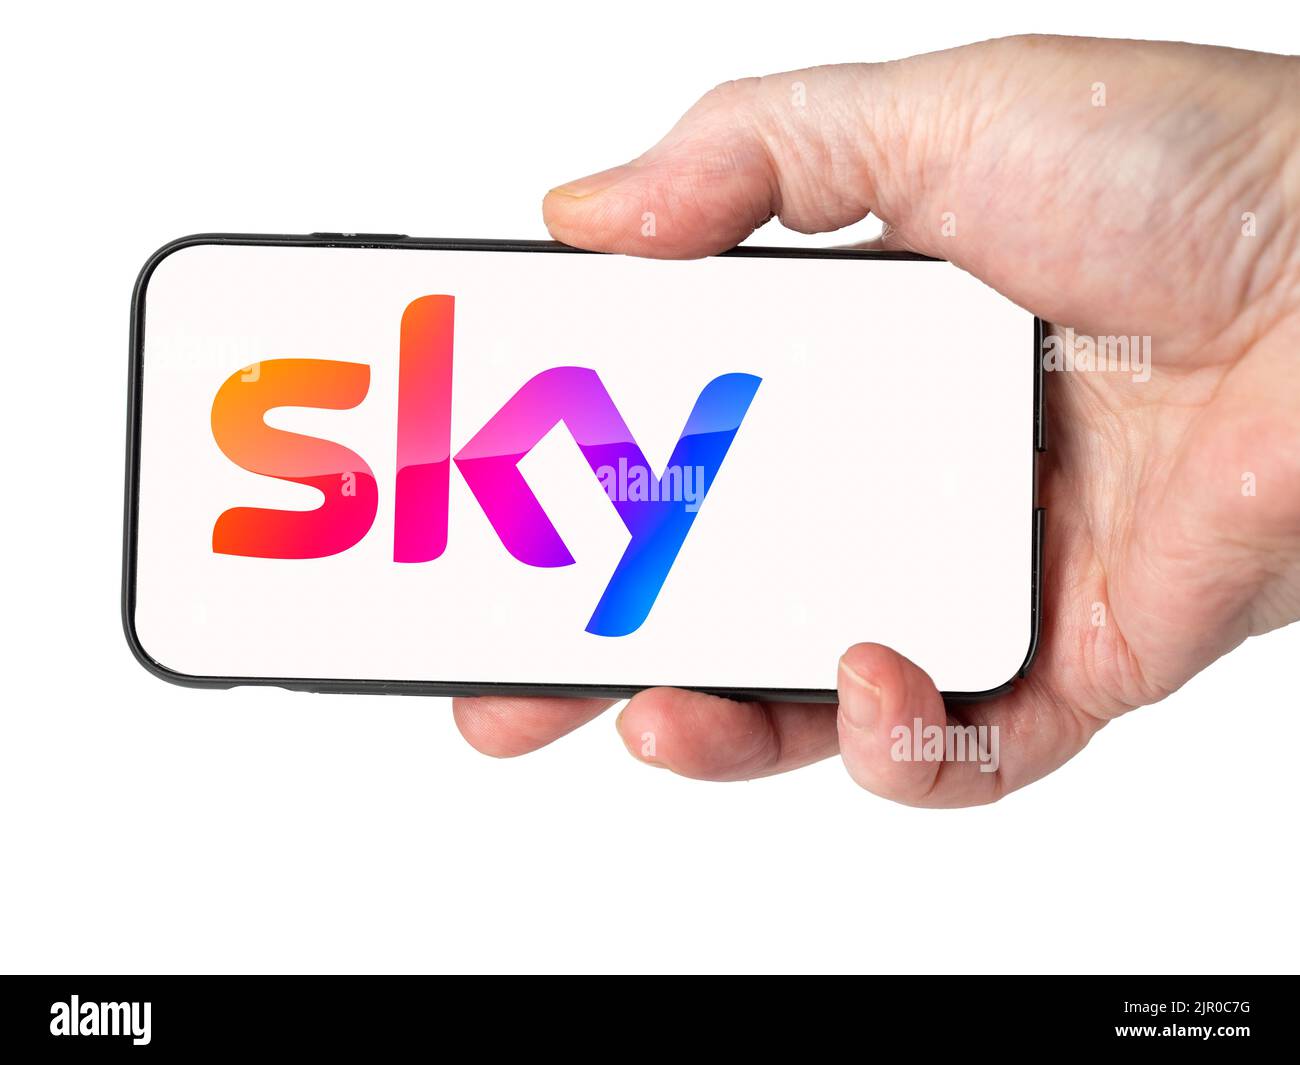 Cardiff Mid glamorgan Wales UK  August 20 2022 Person holding mobile phone with logo of Sky Television and digital services on a Cell phone screen Stock Photo